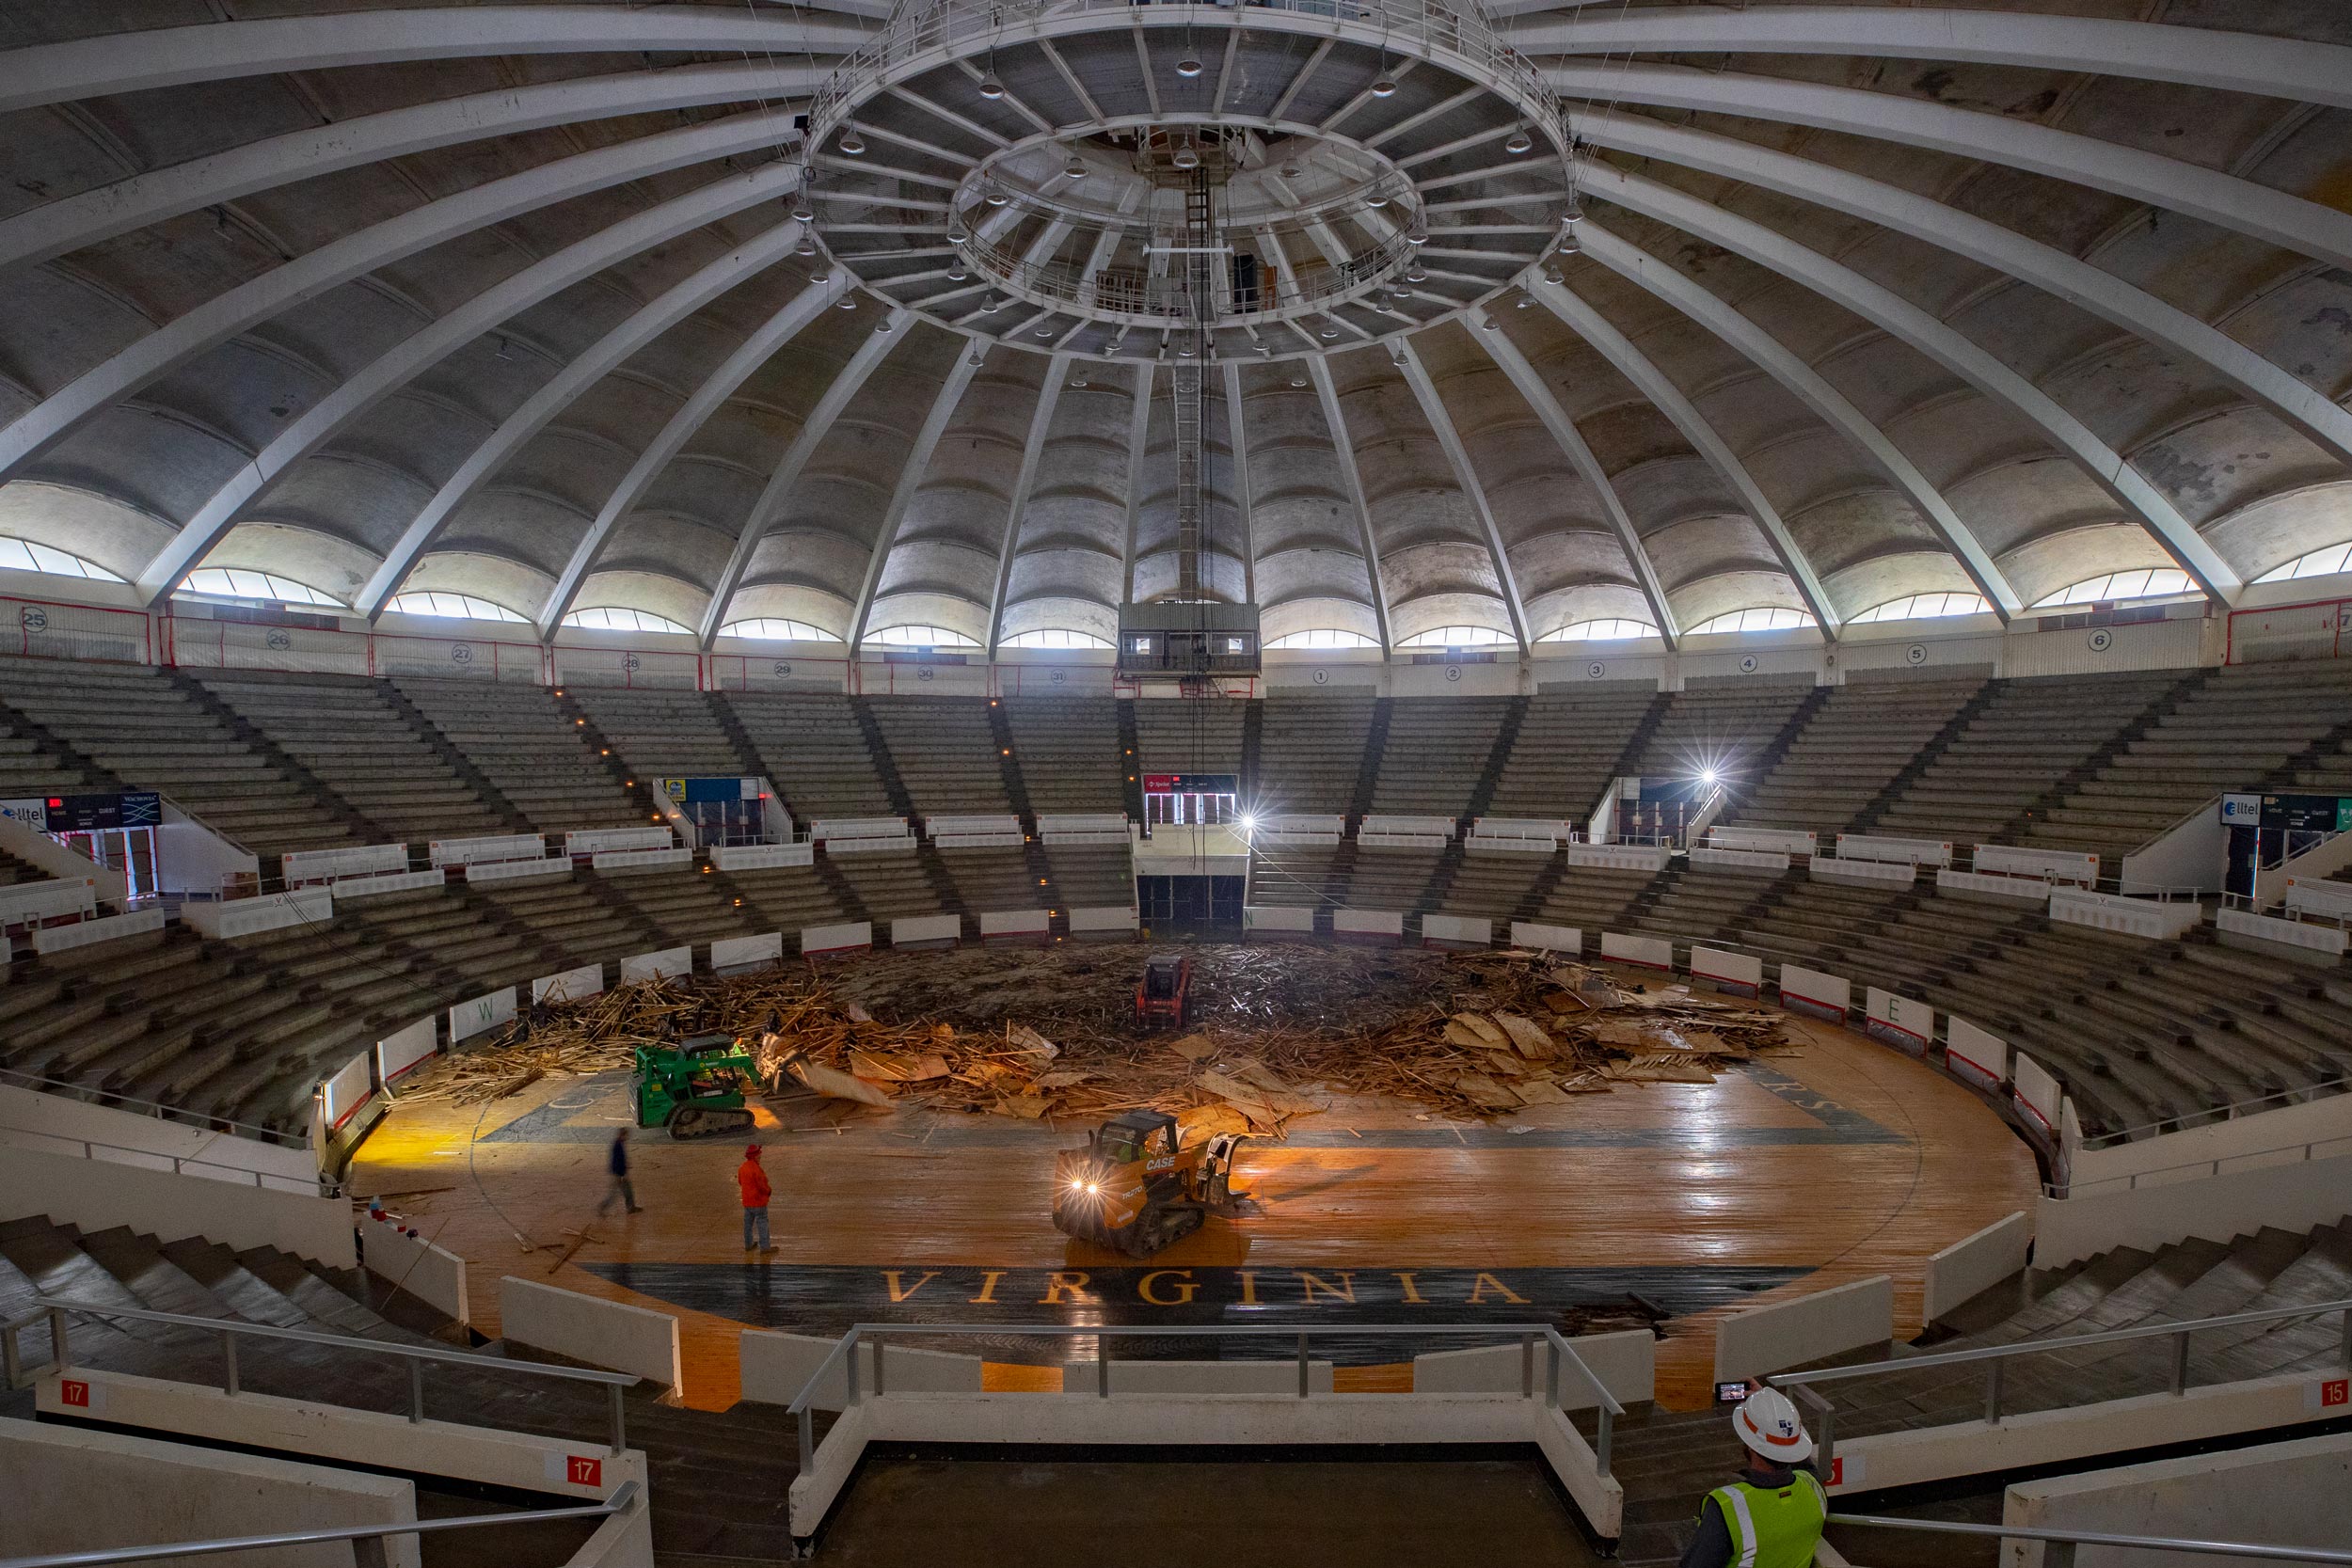 Uhall's dome hardwood flooring being removed